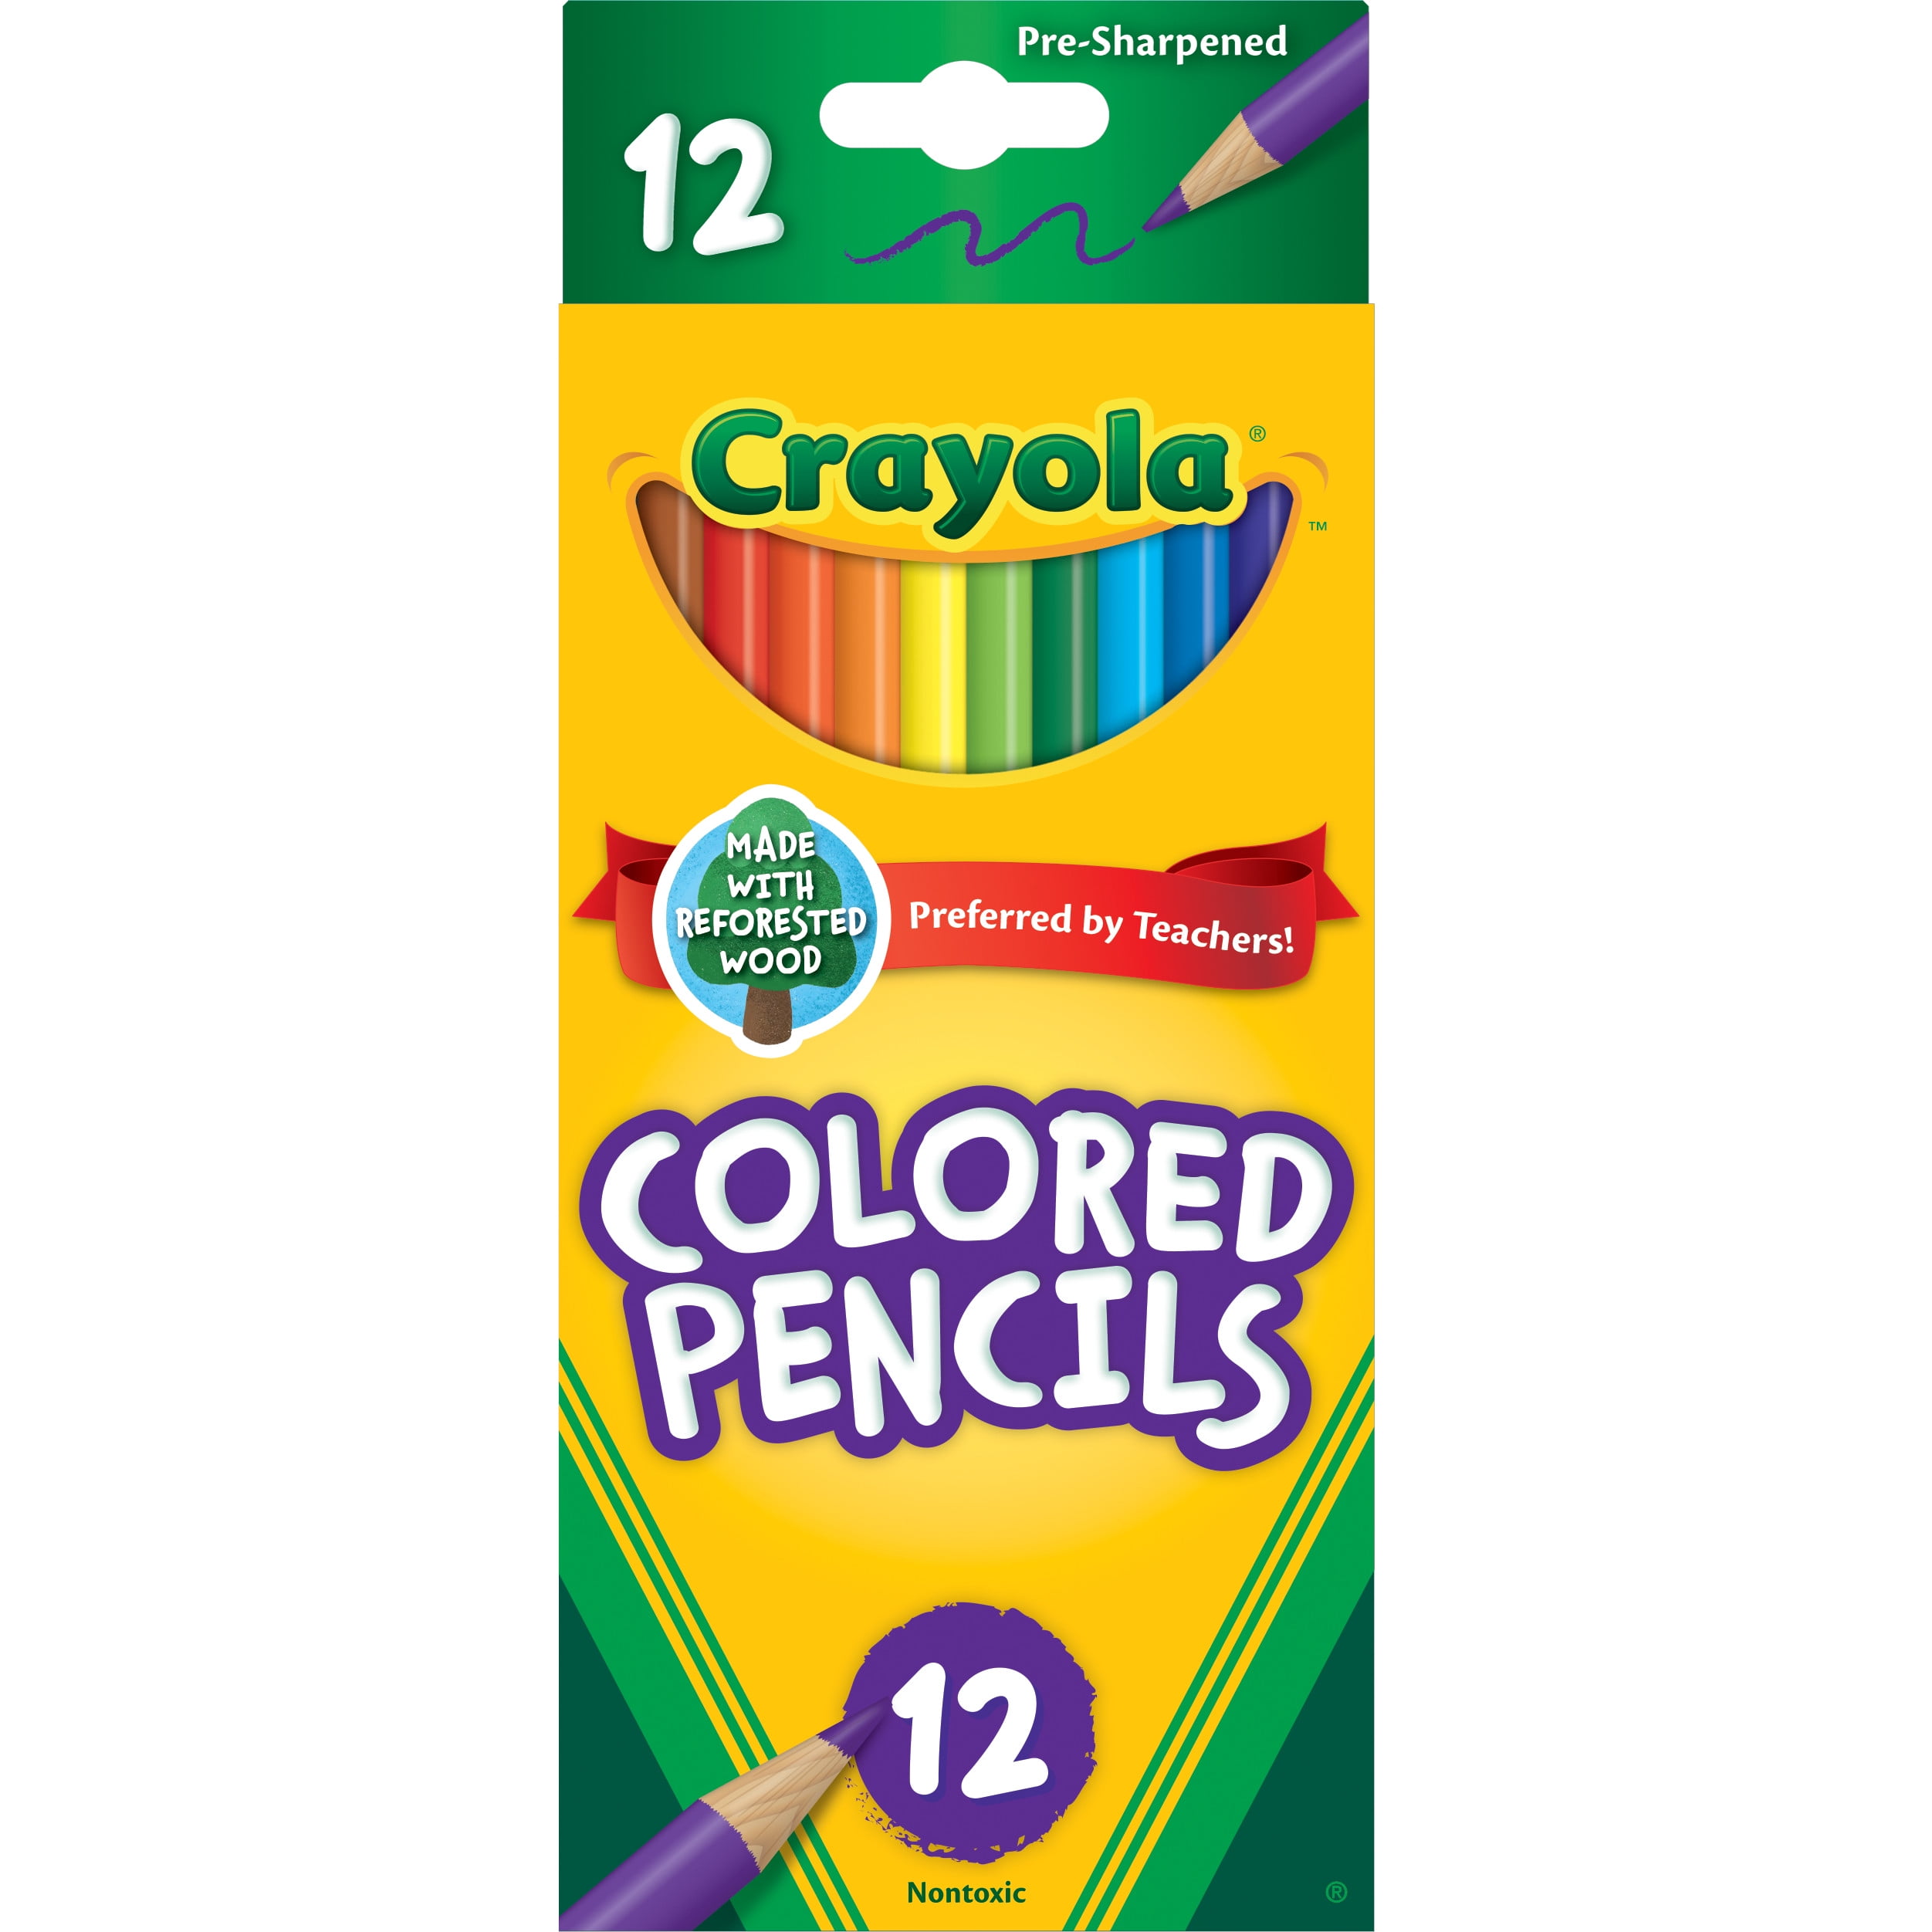 Live Colorfully! Colored Pencil Pouch Kit, Set of 50